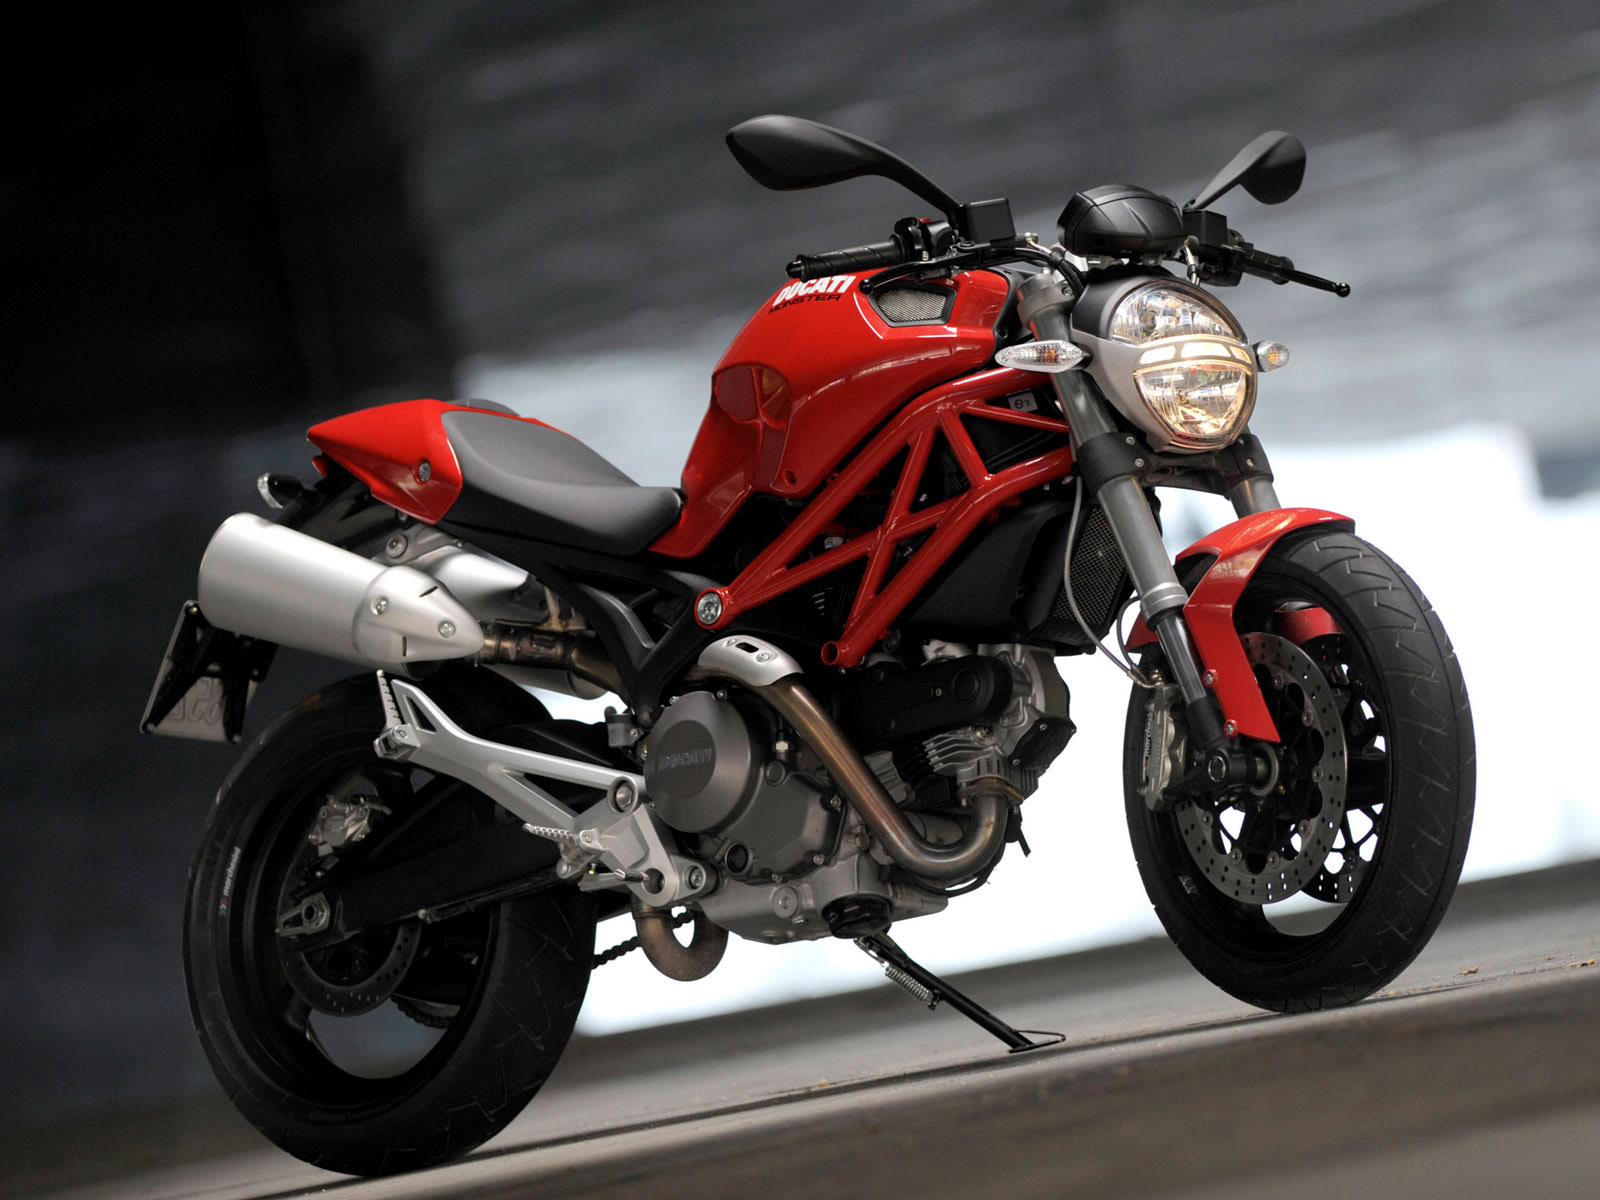 2009 DUCATI Monster 696 accident lawyers info